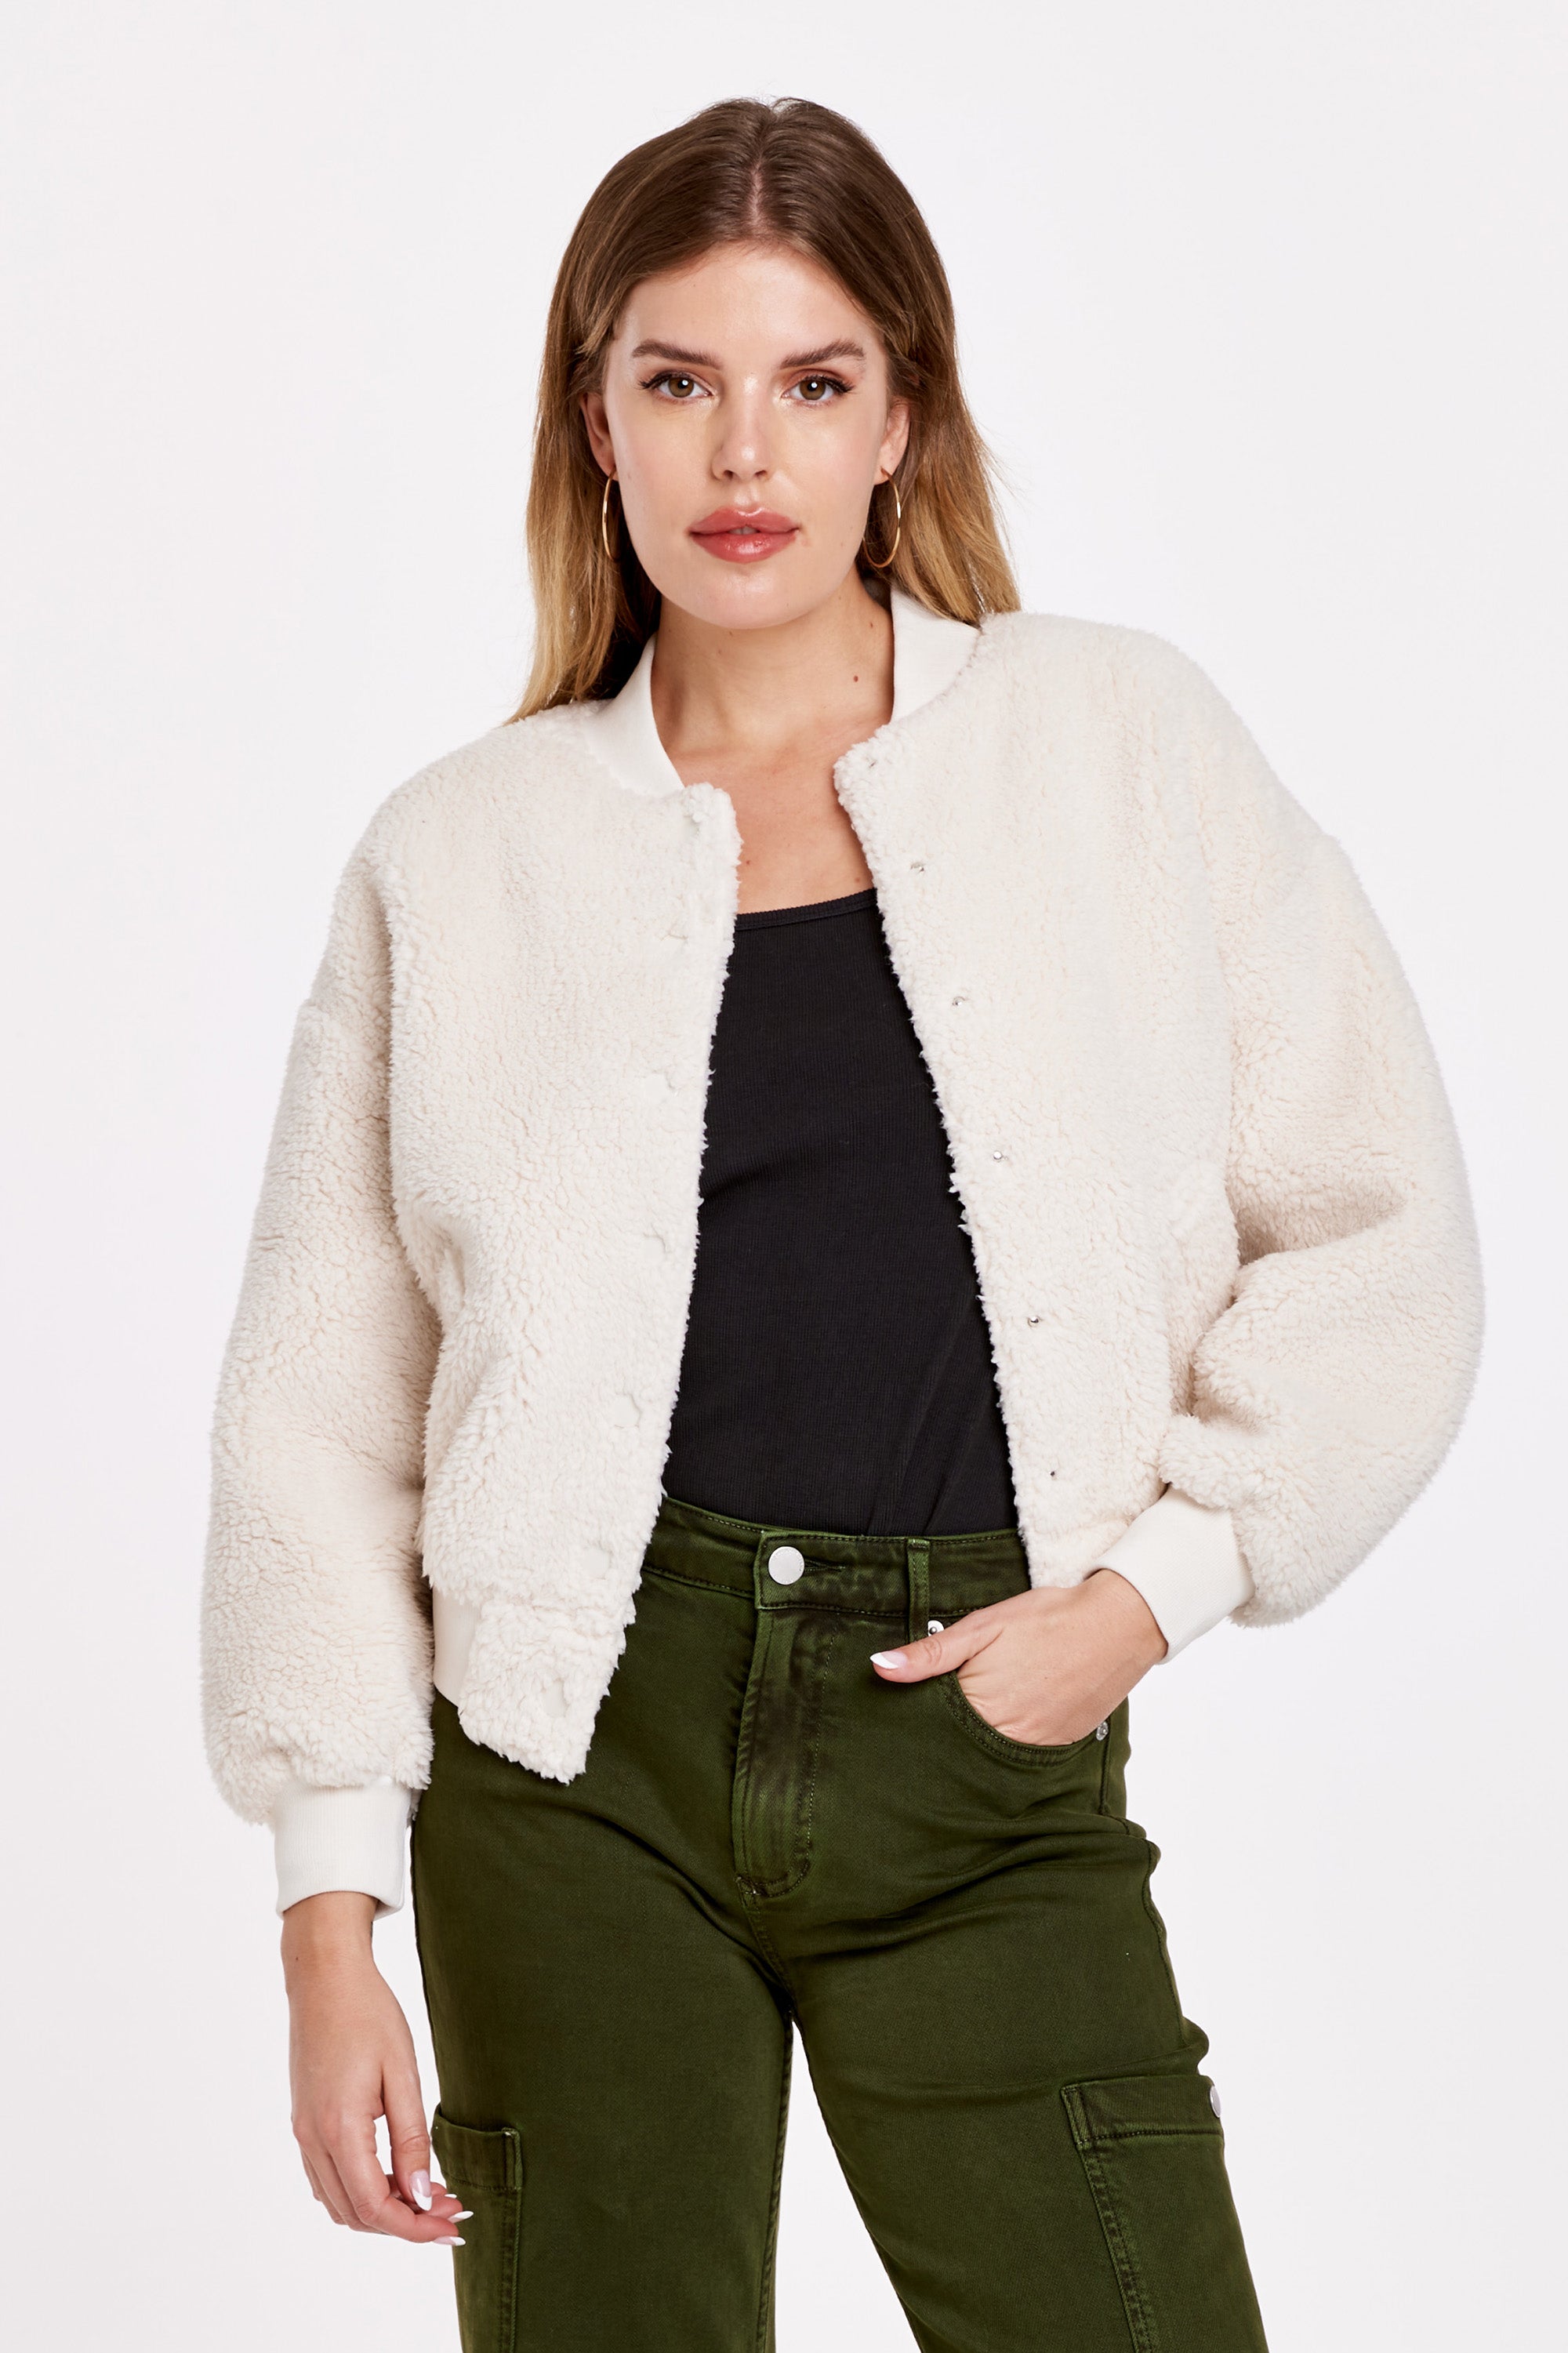 Winter Sherpa Fleece leggings outfit - Everyday Holly